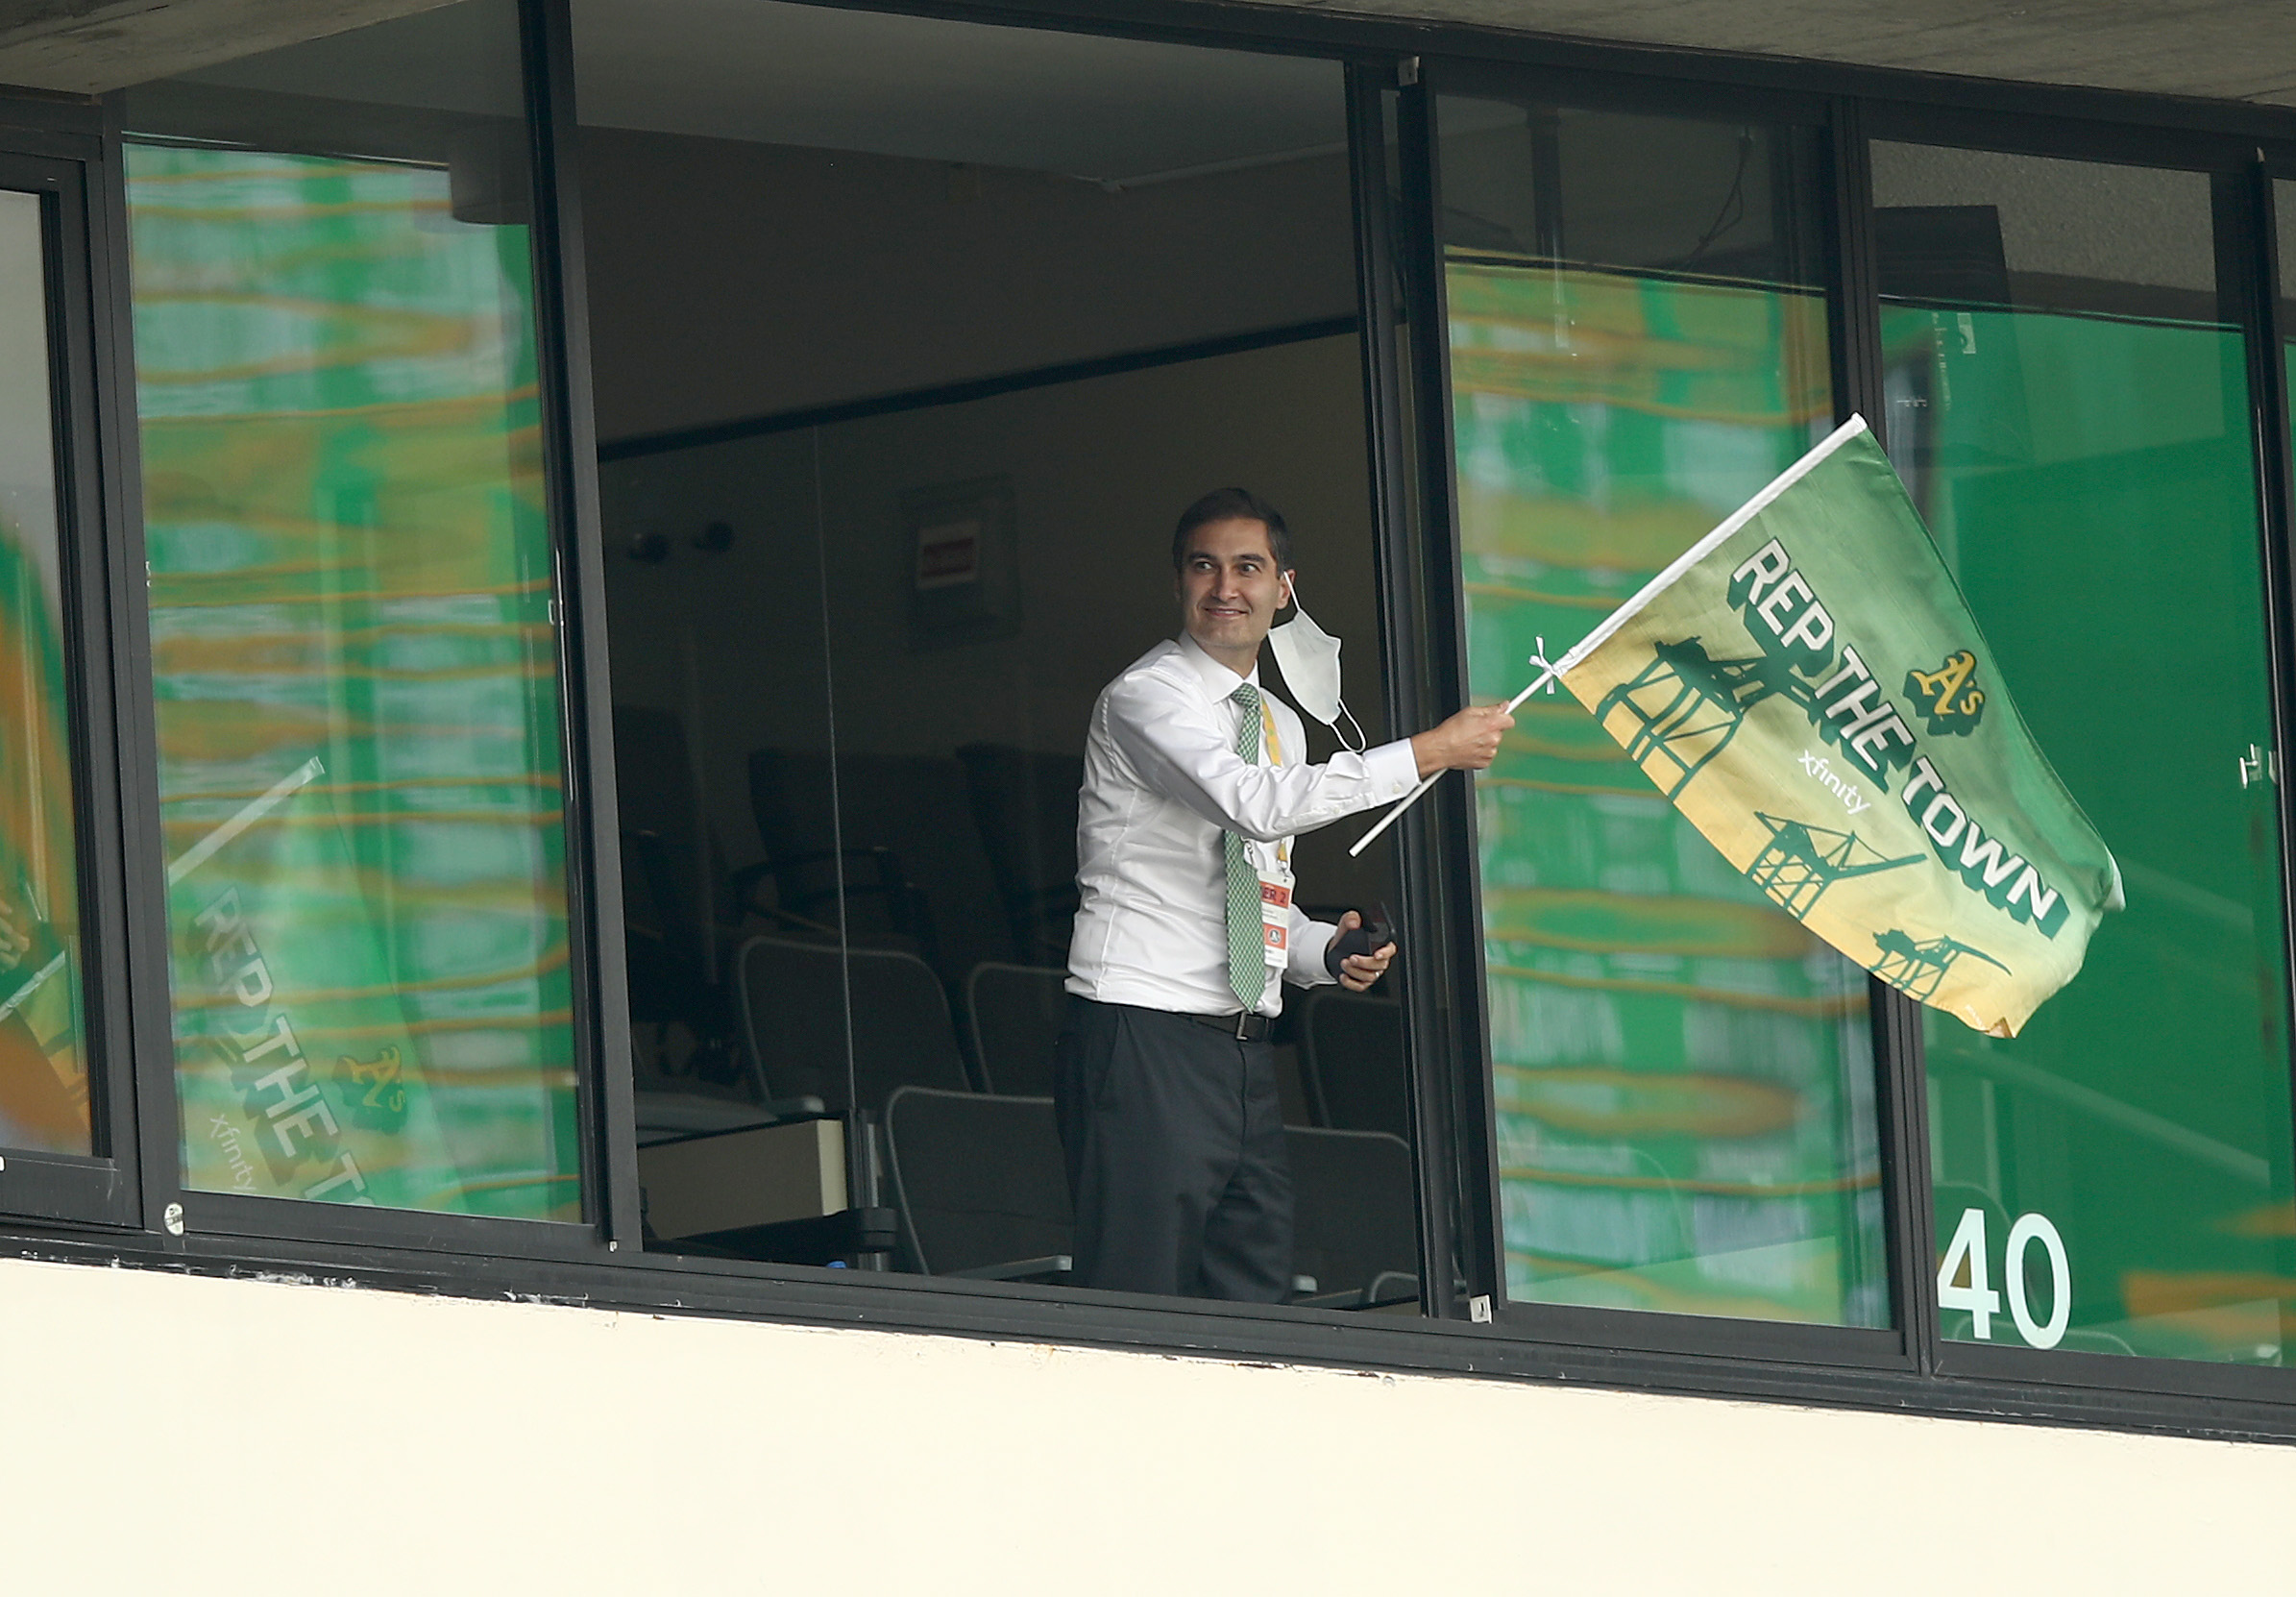 OAKLAND, CALIFORNIA - OCTOBER 01: Oakland Athletics team president Dave Kaval waves a flag after they tied their game against the Chicago White Sox in the fourth inning of Game Three of the American League wild card series at RingCentral Coliseum on October 01, 2020 in Oakland, California. (Photo by Ezra Shaw/Getty Images)